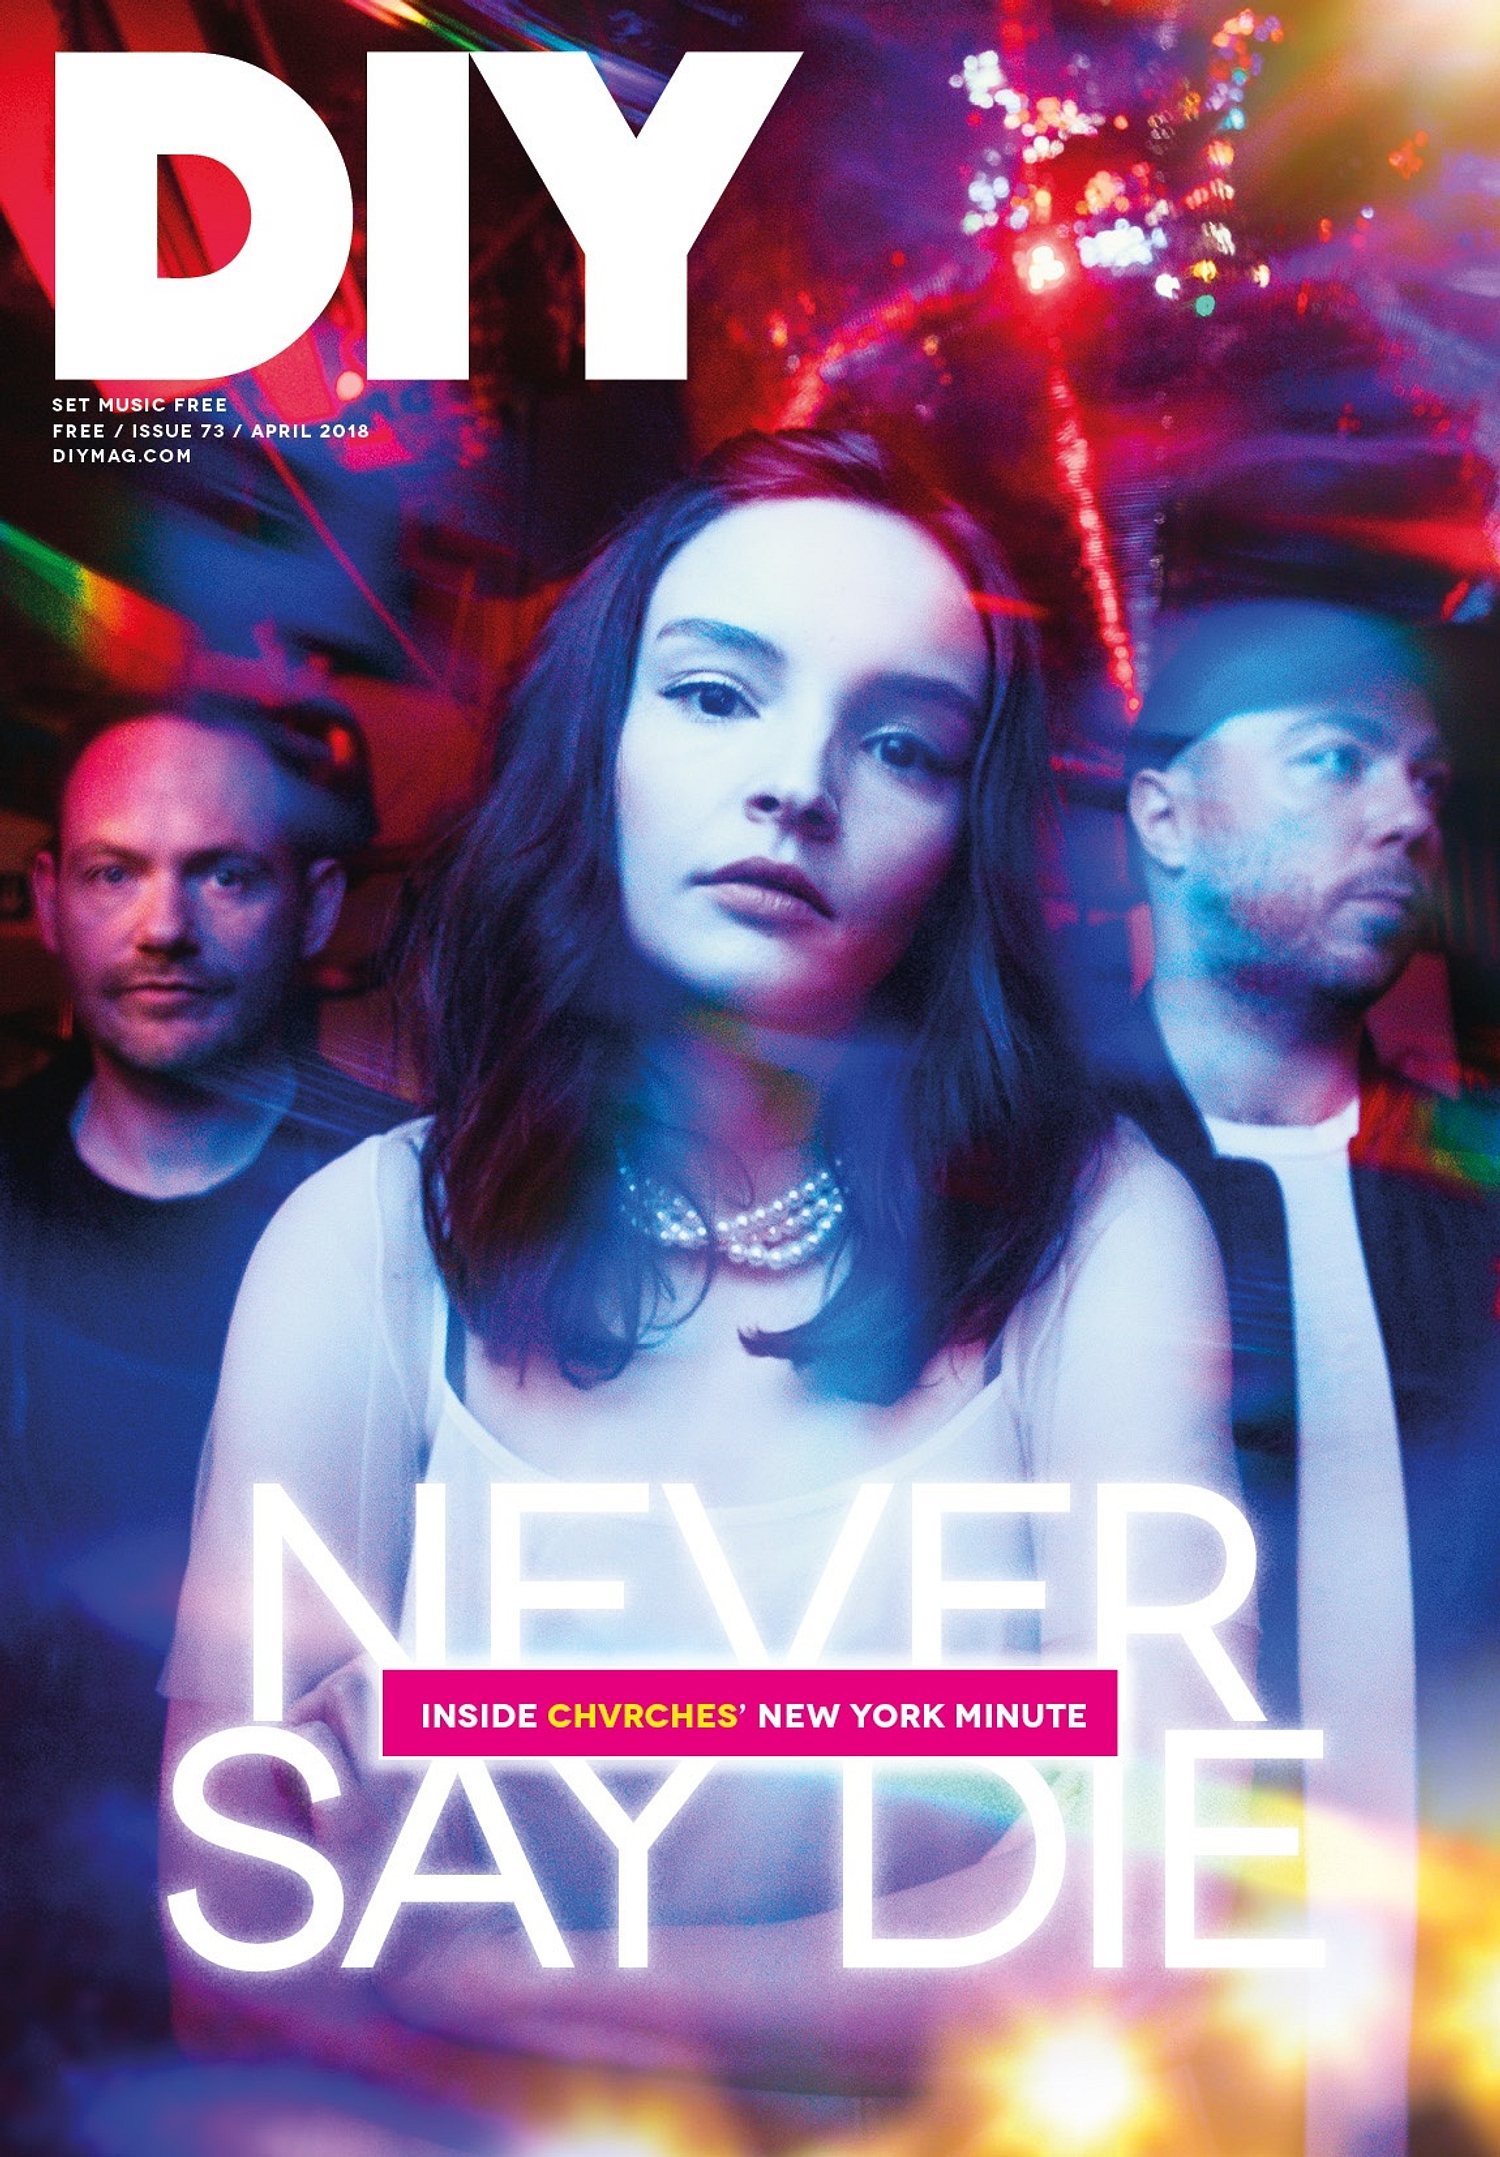 Chvrches front the April issue of DIY!